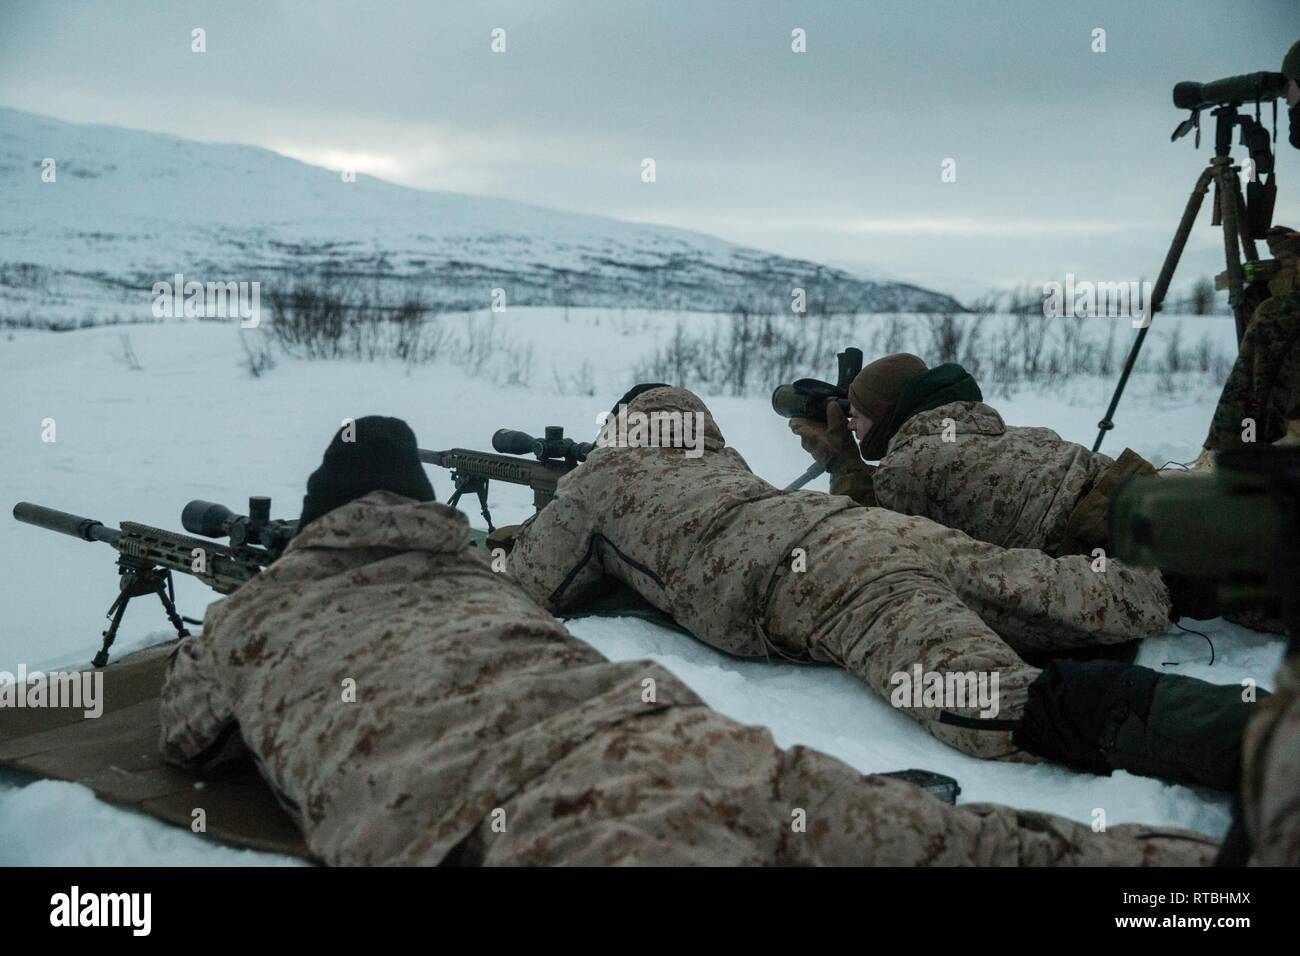 U.S. Marines with Marine Rotational Force-Europe 19.1, Marine Forces Europe and Africa, aim at a target in Setermoen, Norway, Feb. 7, 2019. This training increased MRF-E Marines’ proficiency at cold-weather and mountain-warfare tactical operations in cold-weather environments. Stock Photo